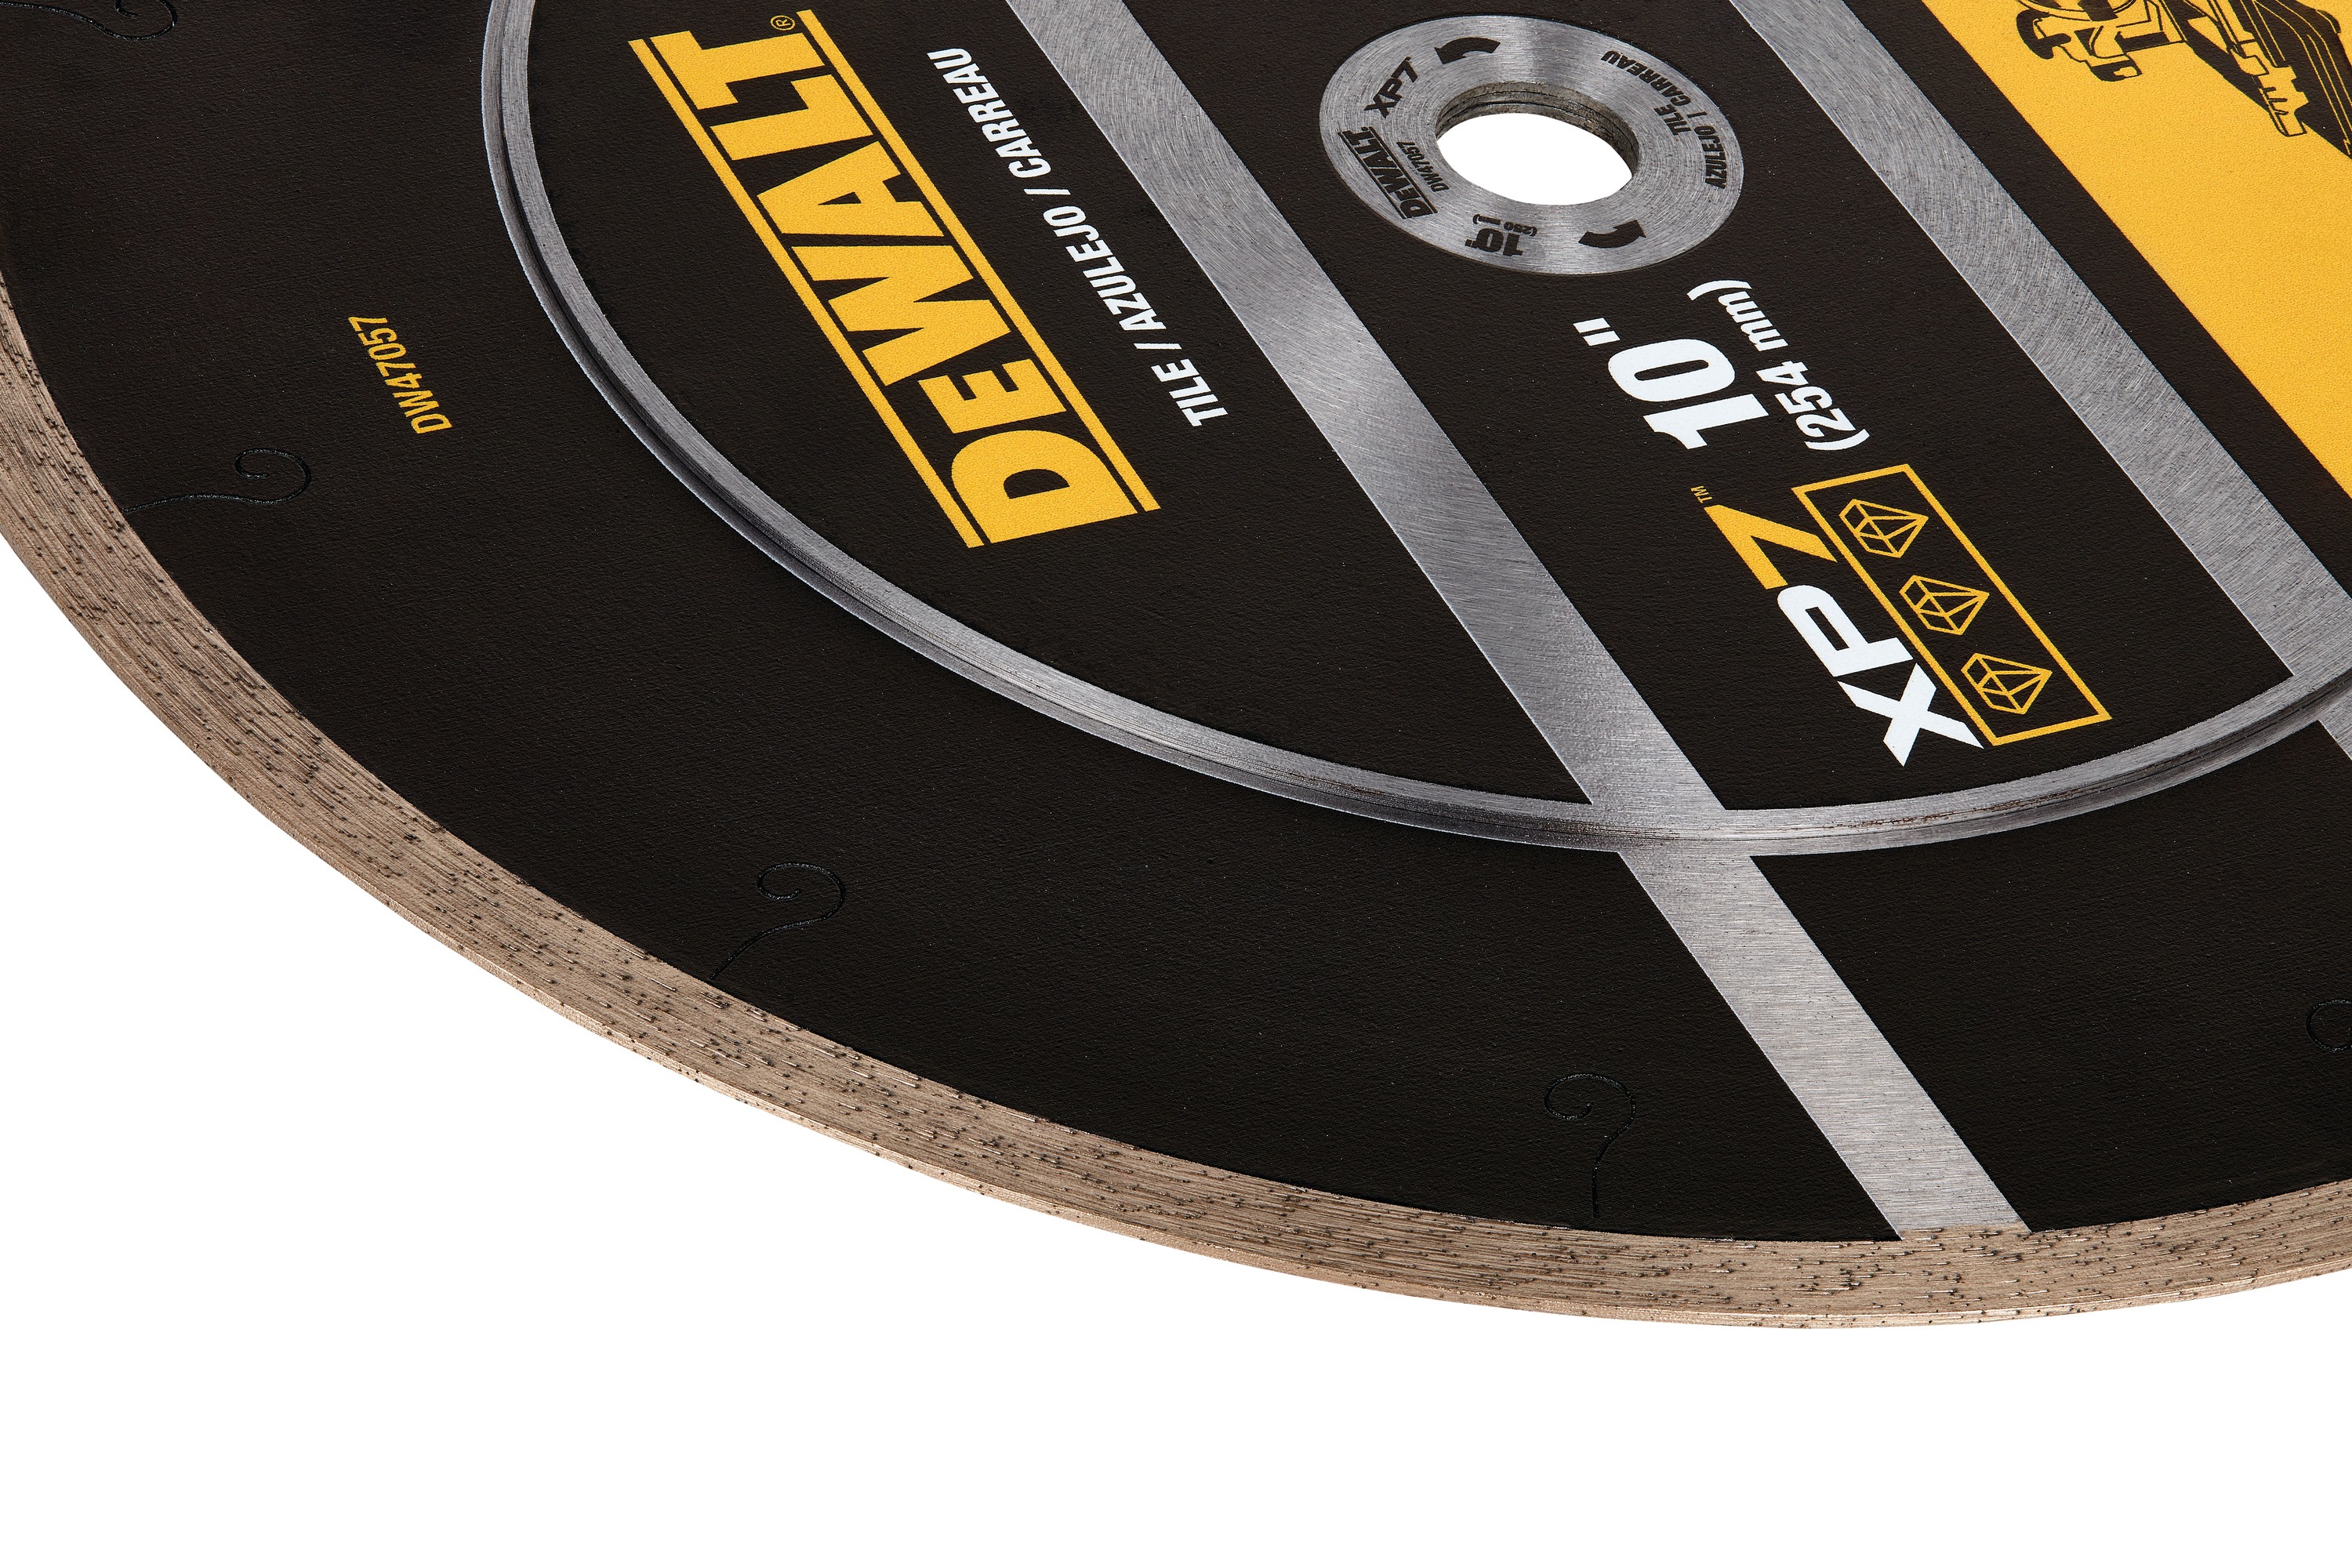 Ultra thin outer rim feature of Tile diamond blades.